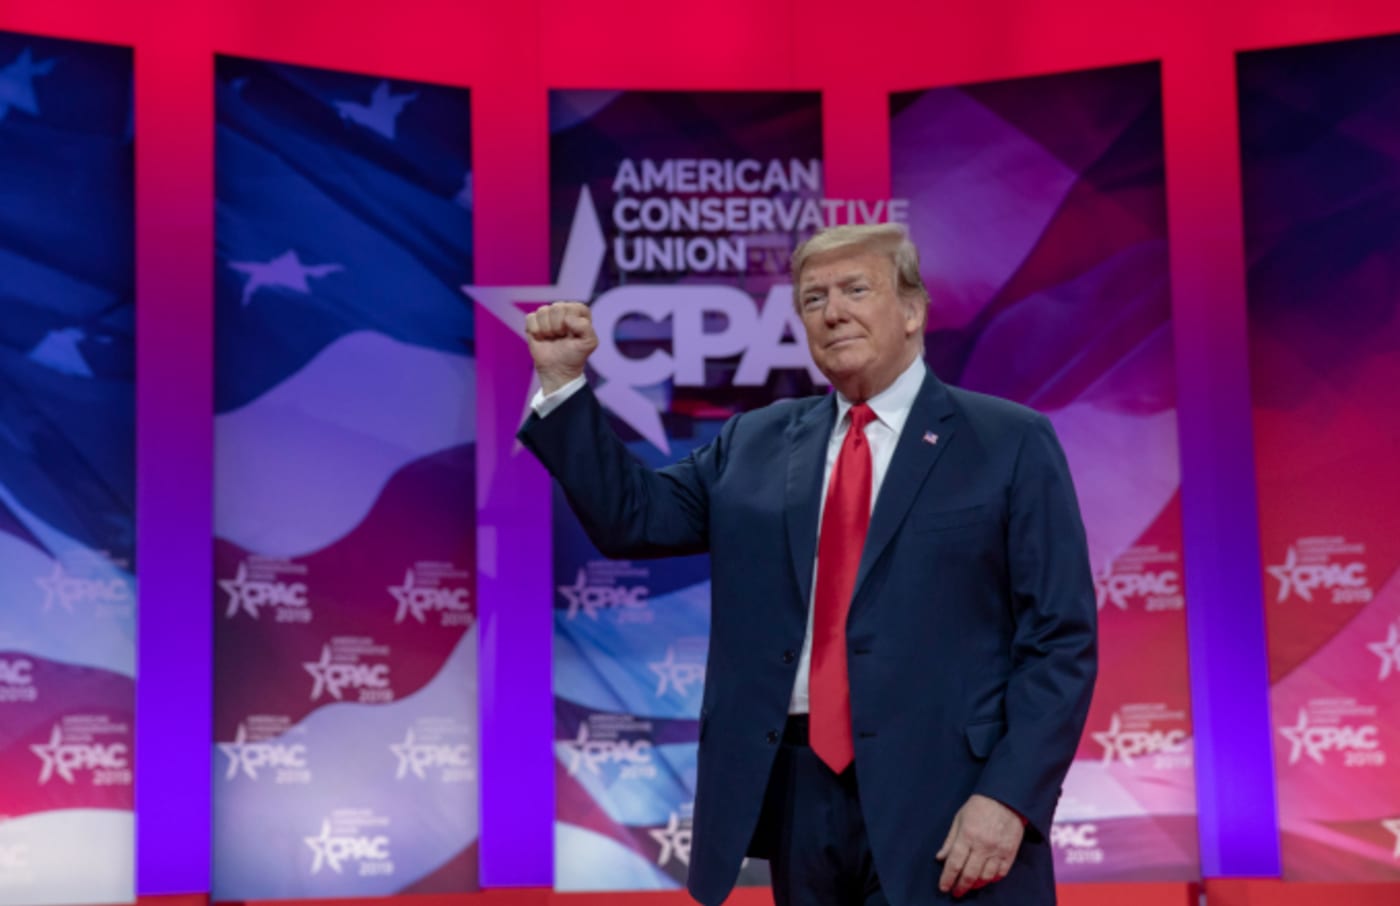 President Donald Trump greets supporters during CPAC 2019